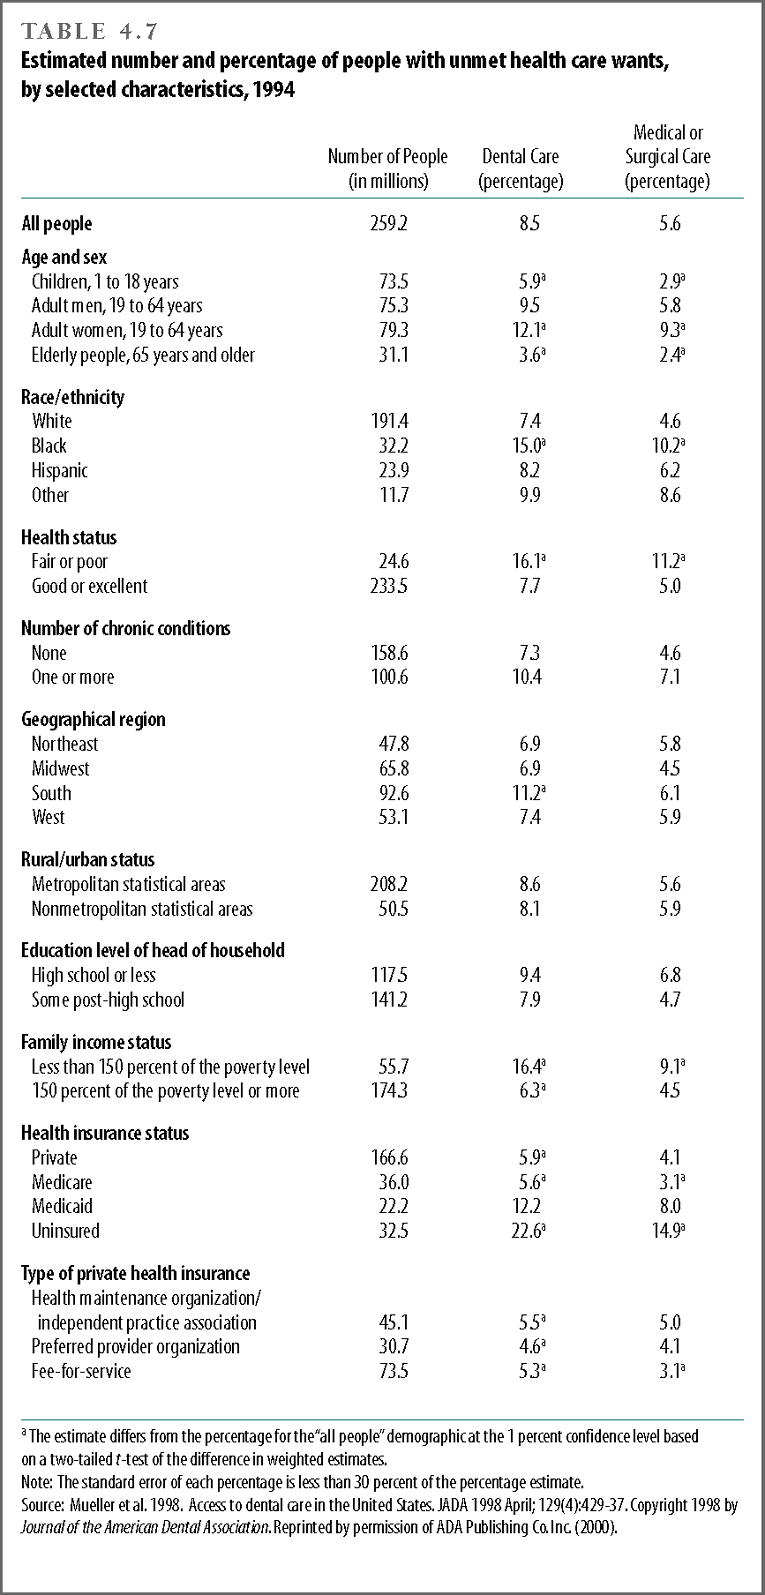 Estimated number and percentage of people with unmet health care wants, by selected characteristics, 1994